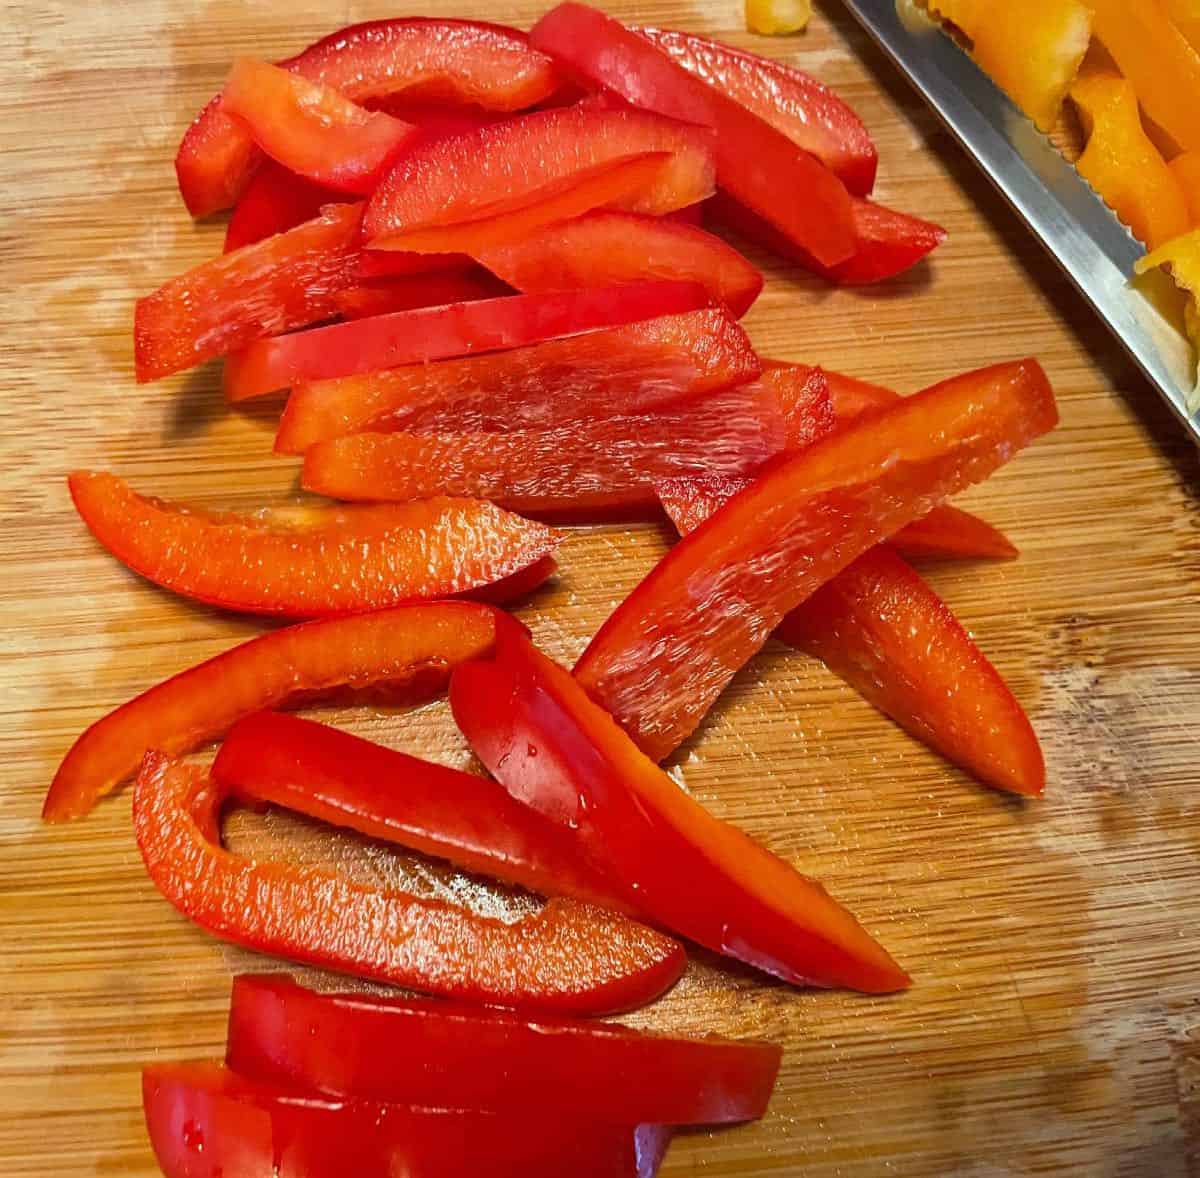 Sliced red peppers on a wood cutting board.